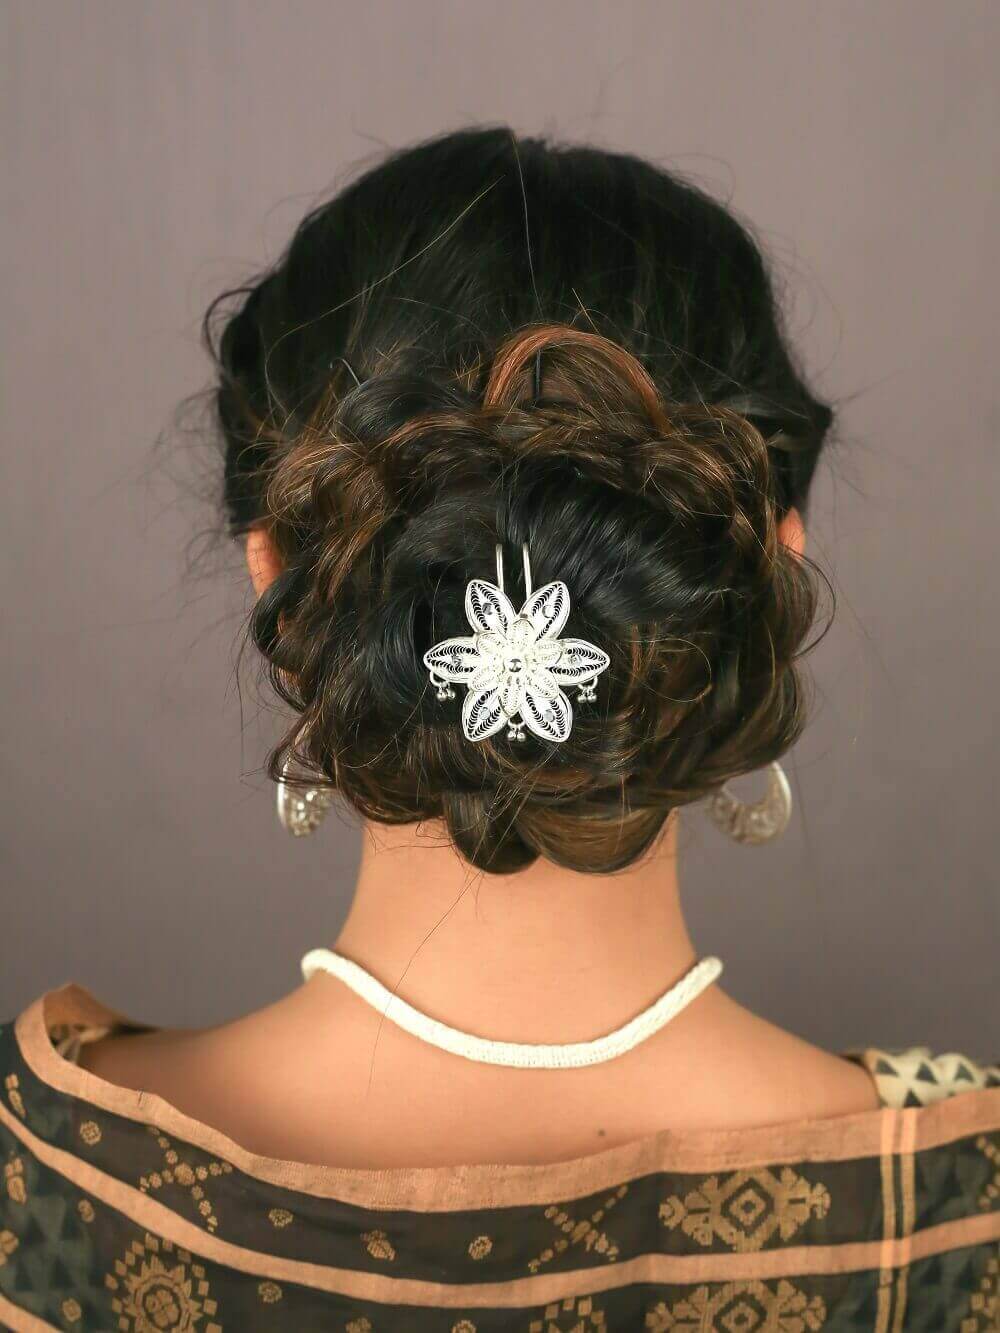 RAYCOLLECTION PINK-WHITE SHADED HAIR PIN/JUDA PIN FOR  WEDDING/ENGAGEMENT/PARTY Bun Clip Price in India - Buy RAYCOLLECTION  PINK-WHITE SHADED HAIR PIN/JUDA PIN FOR WEDDING/ENGAGEMENT/PARTY Bun Clip  online at Flipkart.com